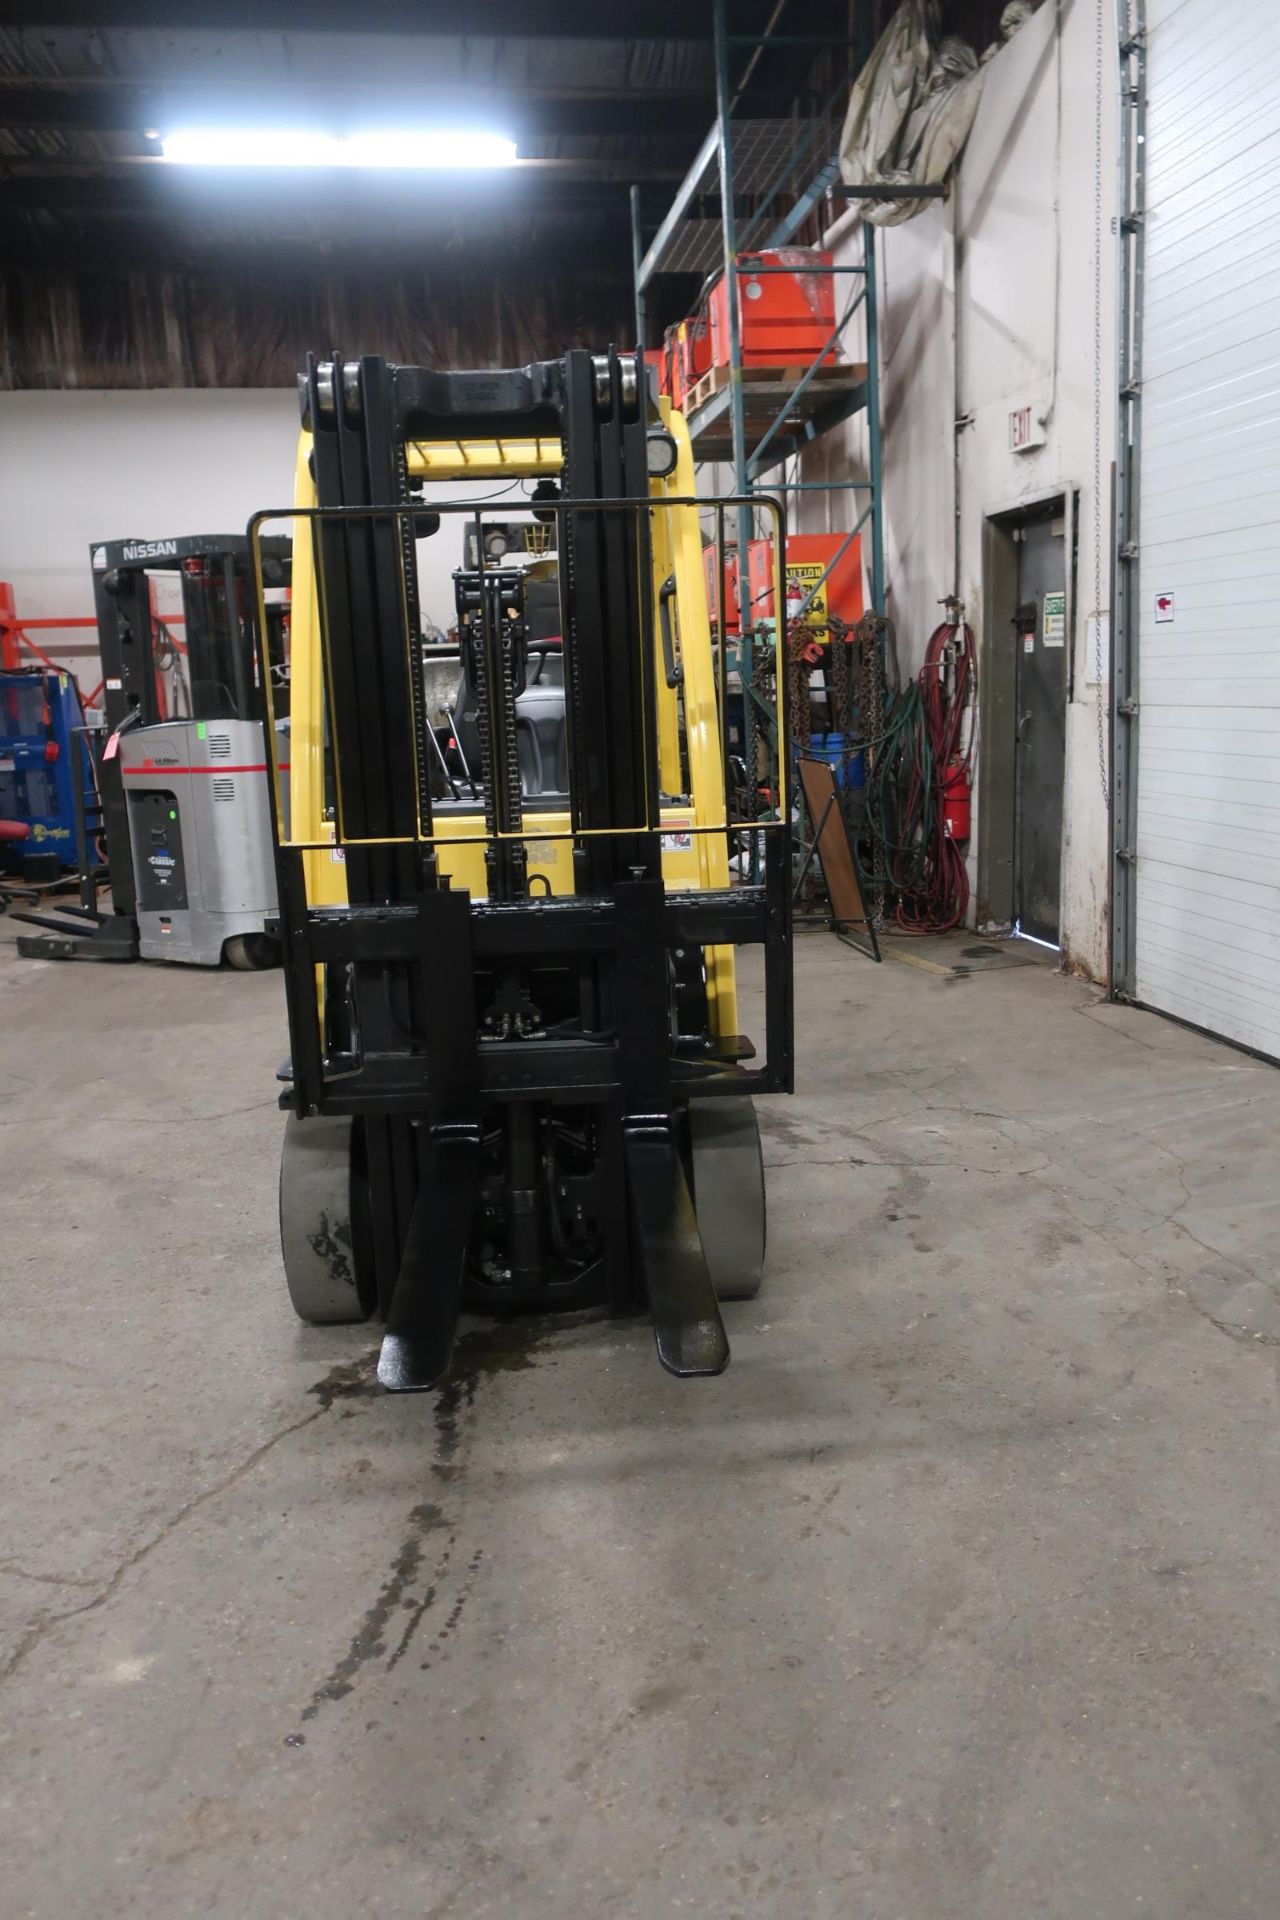 FREE CUSTOMS - 2014 Hyster 5000lbs Capacity Forklift with 3-stage mast - LPG (propane) w sideshift - Image 2 of 2